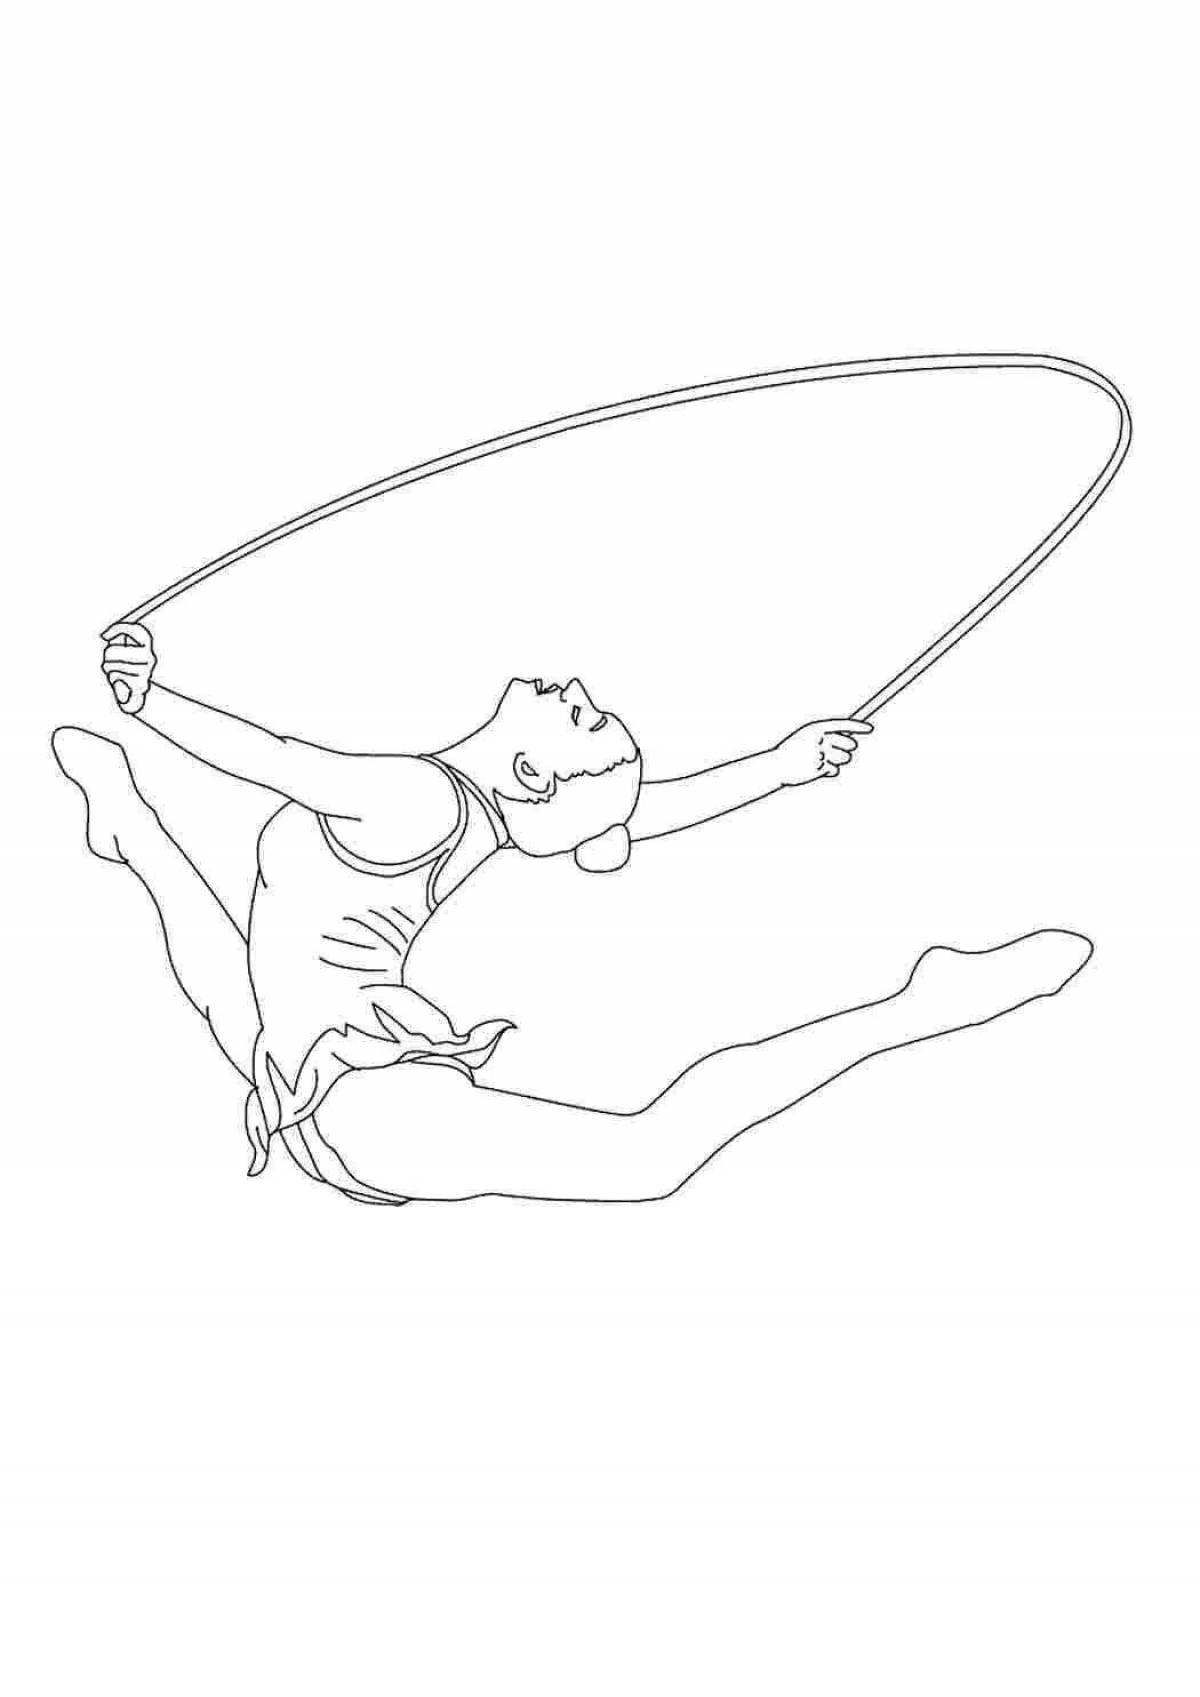 Coloring page stretching gymnast